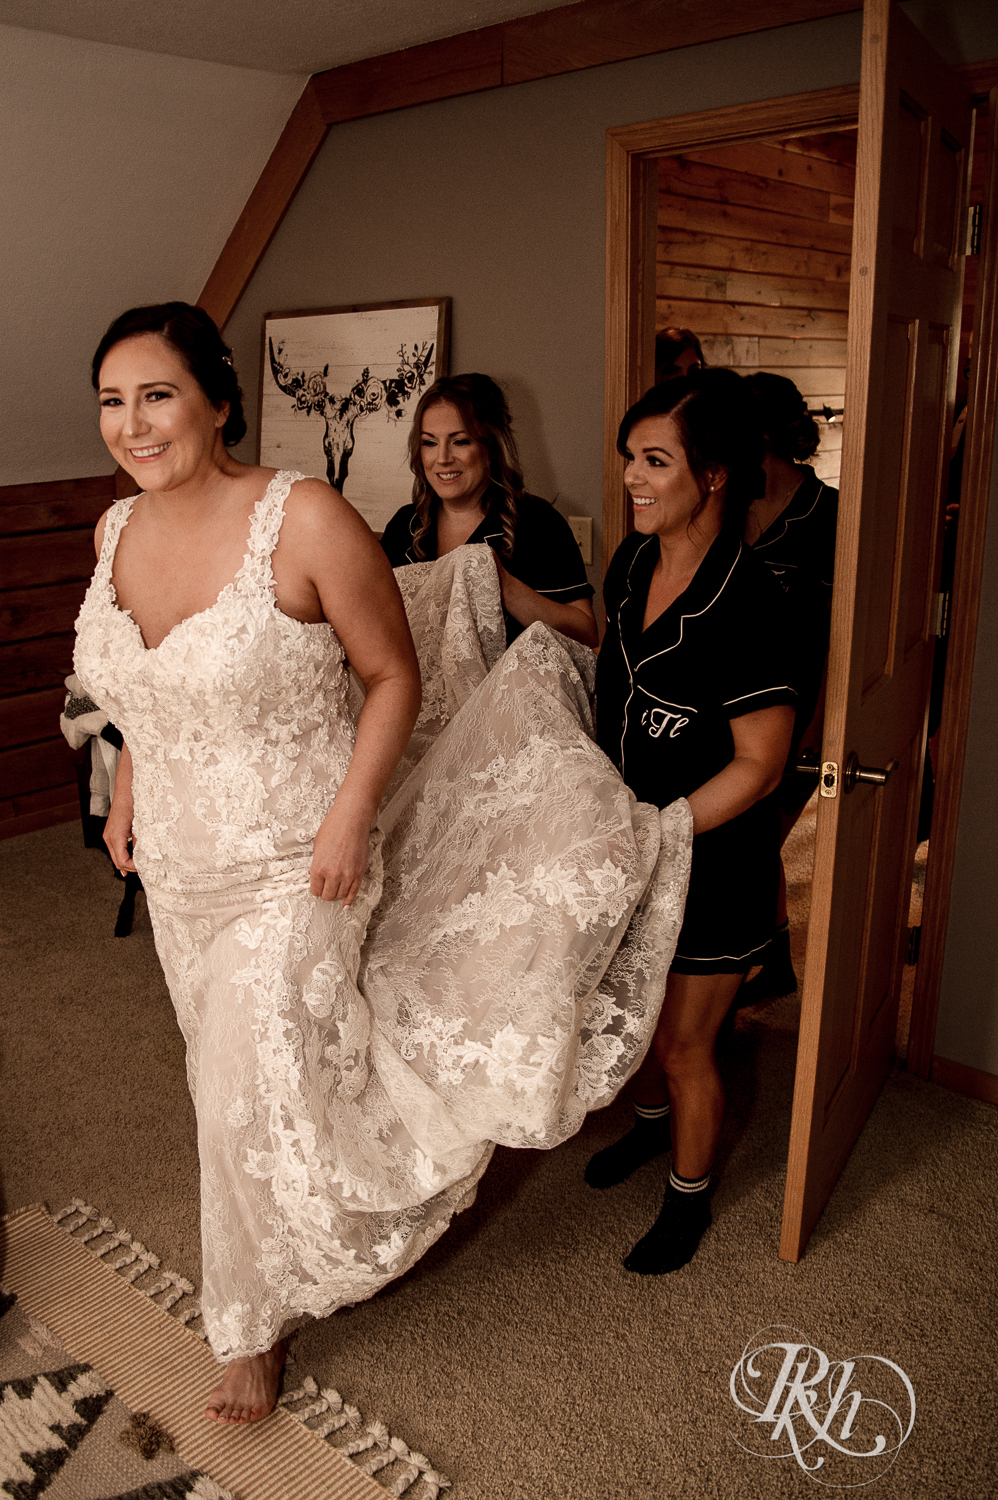 Bride laughing with her bridesmaids before the wedding at a cabin A-frame in Stillwater, Minnesota.